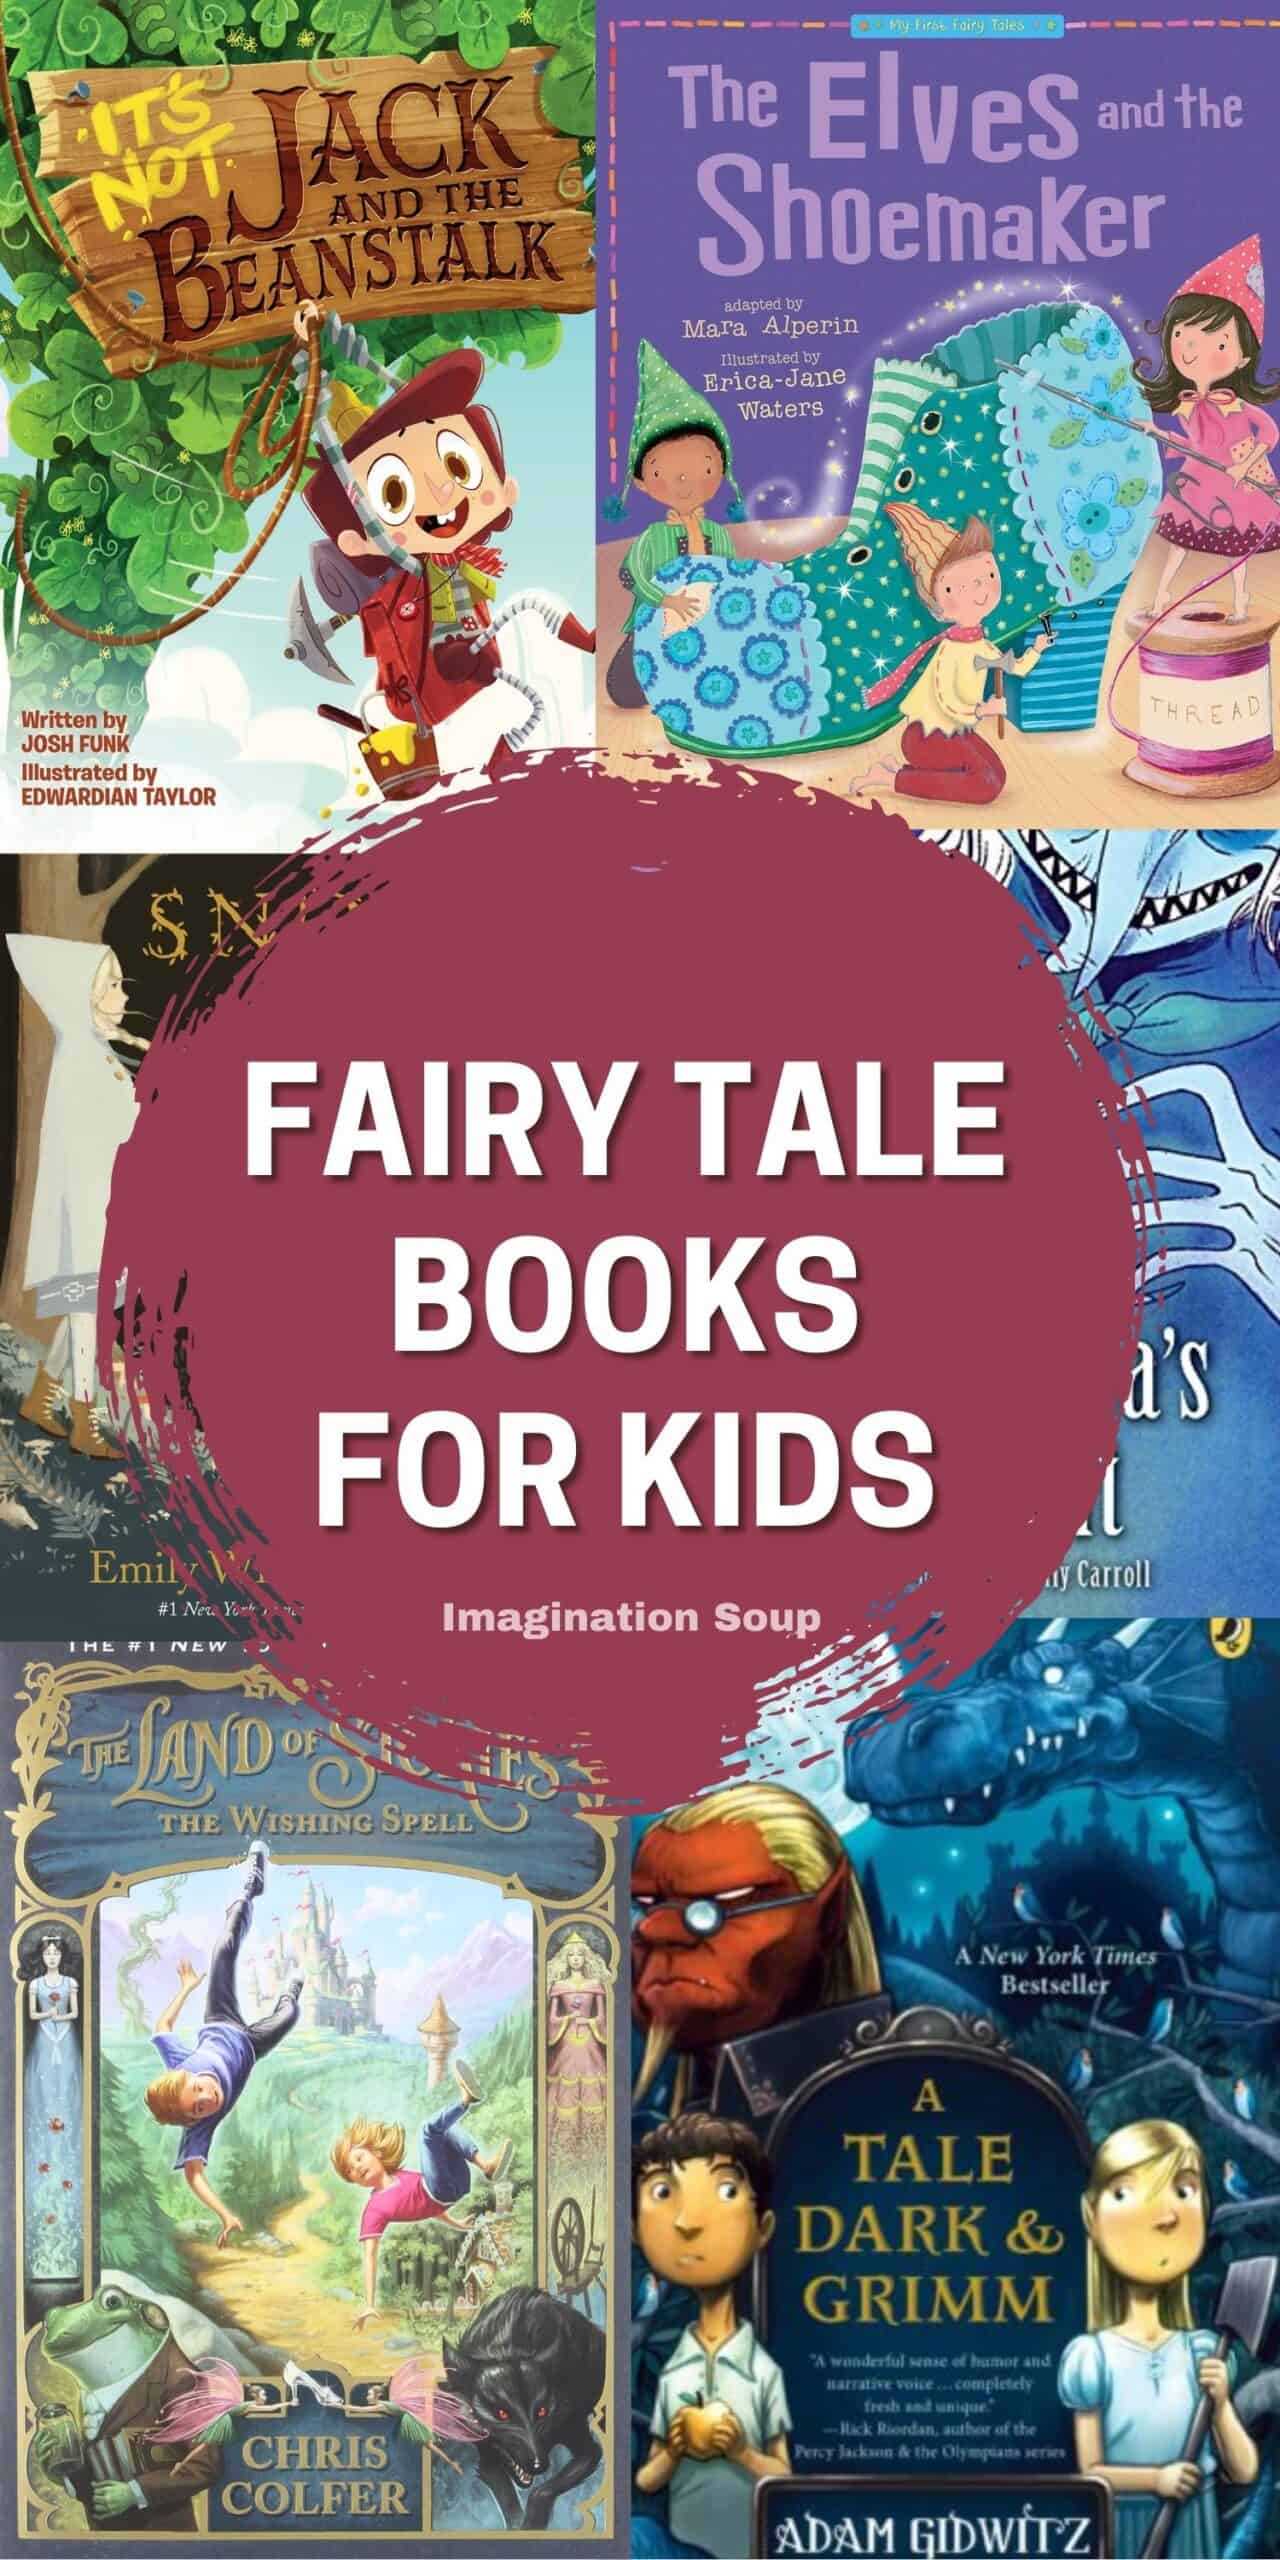 The Best Fairy Tale Books for Kids